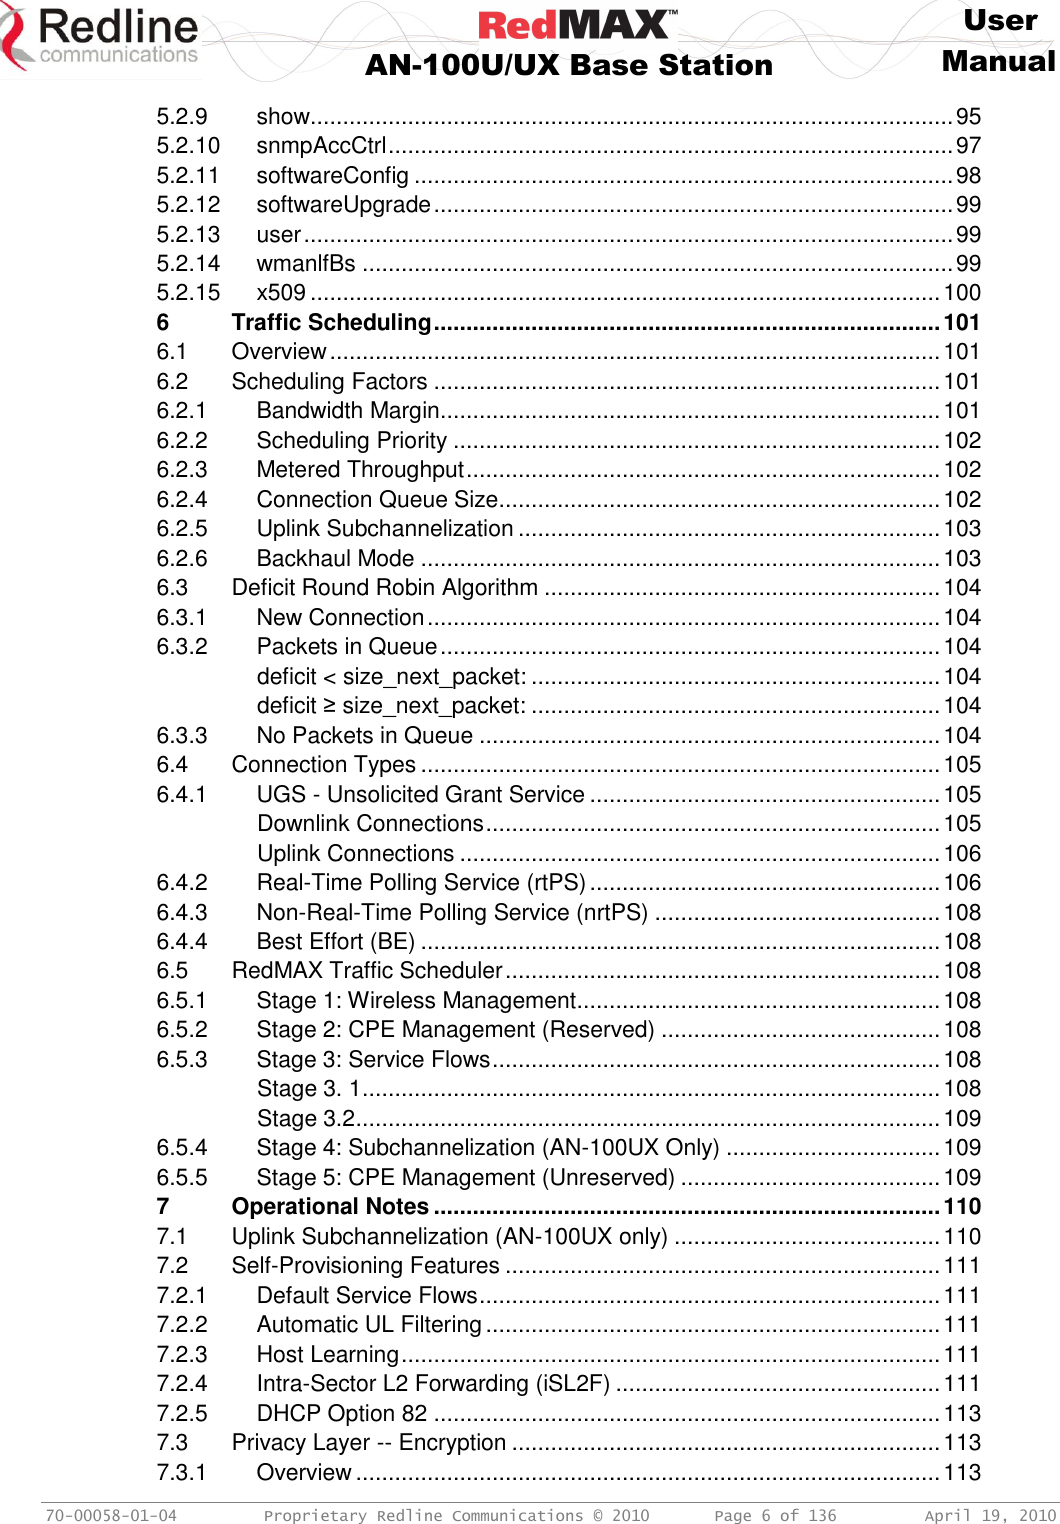     User  AN-100U/UX Base Station Manual   70-00058-01-04  Proprietary Redline Communications © 2010   Page 6 of 136  April 19, 2010 5.2.9 show................................................................................................... 95 5.2.10 snmpAccCtrl ....................................................................................... 97 5.2.11 softwareConfig ................................................................................... 98 5.2.12 softwareUpgrade ................................................................................ 99 5.2.13 user .................................................................................................... 99 5.2.14 wmanlfBs ........................................................................................... 99 5.2.15 x509 ................................................................................................. 100 6 Traffic Scheduling .............................................................................. 101 6.1 Overview .............................................................................................. 101 6.2 Scheduling Factors .............................................................................. 101 6.2.1 Bandwidth Margin............................................................................. 101 6.2.2 Scheduling Priority ........................................................................... 102 6.2.3 Metered Throughput ......................................................................... 102 6.2.4 Connection Queue Size.................................................................... 102 6.2.5 Uplink Subchannelization ................................................................. 103 6.2.6 Backhaul Mode ................................................................................ 103 6.3 Deficit Round Robin Algorithm ............................................................. 104 6.3.1 New Connection ............................................................................... 104 6.3.2 Packets in Queue ............................................................................. 104 deficit &lt; size_next_packet: ............................................................... 104 deficit ≥ size_next_packet: ............................................................... 104 6.3.3 No Packets in Queue ....................................................................... 104 6.4 Connection Types ................................................................................ 105 6.4.1 UGS - Unsolicited Grant Service ...................................................... 105 Downlink Connections ...................................................................... 105 Uplink Connections .......................................................................... 106 6.4.2 Real-Time Polling Service (rtPS) ...................................................... 106 6.4.3 Non-Real-Time Polling Service (nrtPS) ............................................ 108 6.4.4 Best Effort (BE) ................................................................................ 108 6.5 RedMAX Traffic Scheduler ................................................................... 108 6.5.1 Stage 1: Wireless Management ........................................................ 108 6.5.2 Stage 2: CPE Management (Reserved) ........................................... 108 6.5.3 Stage 3: Service Flows ..................................................................... 108 Stage 3. 1 ......................................................................................... 108 Stage 3.2 .......................................................................................... 109 6.5.4 Stage 4: Subchannelization (AN-100UX Only) ................................. 109 6.5.5 Stage 5: CPE Management (Unreserved) ........................................ 109 7 Operational Notes .............................................................................. 110 7.1 Uplink Subchannelization (AN-100UX only) ......................................... 110 7.2 Self-Provisioning Features ................................................................... 111 7.2.1 Default Service Flows ....................................................................... 111 7.2.2 Automatic UL Filtering ...................................................................... 111 7.2.3 Host Learning ................................................................................... 111 7.2.4 Intra-Sector L2 Forwarding (iSL2F) .................................................. 111 7.2.5 DHCP Option 82 .............................................................................. 113 7.3 Privacy Layer -- Encryption .................................................................. 113 7.3.1 Overview .......................................................................................... 113 